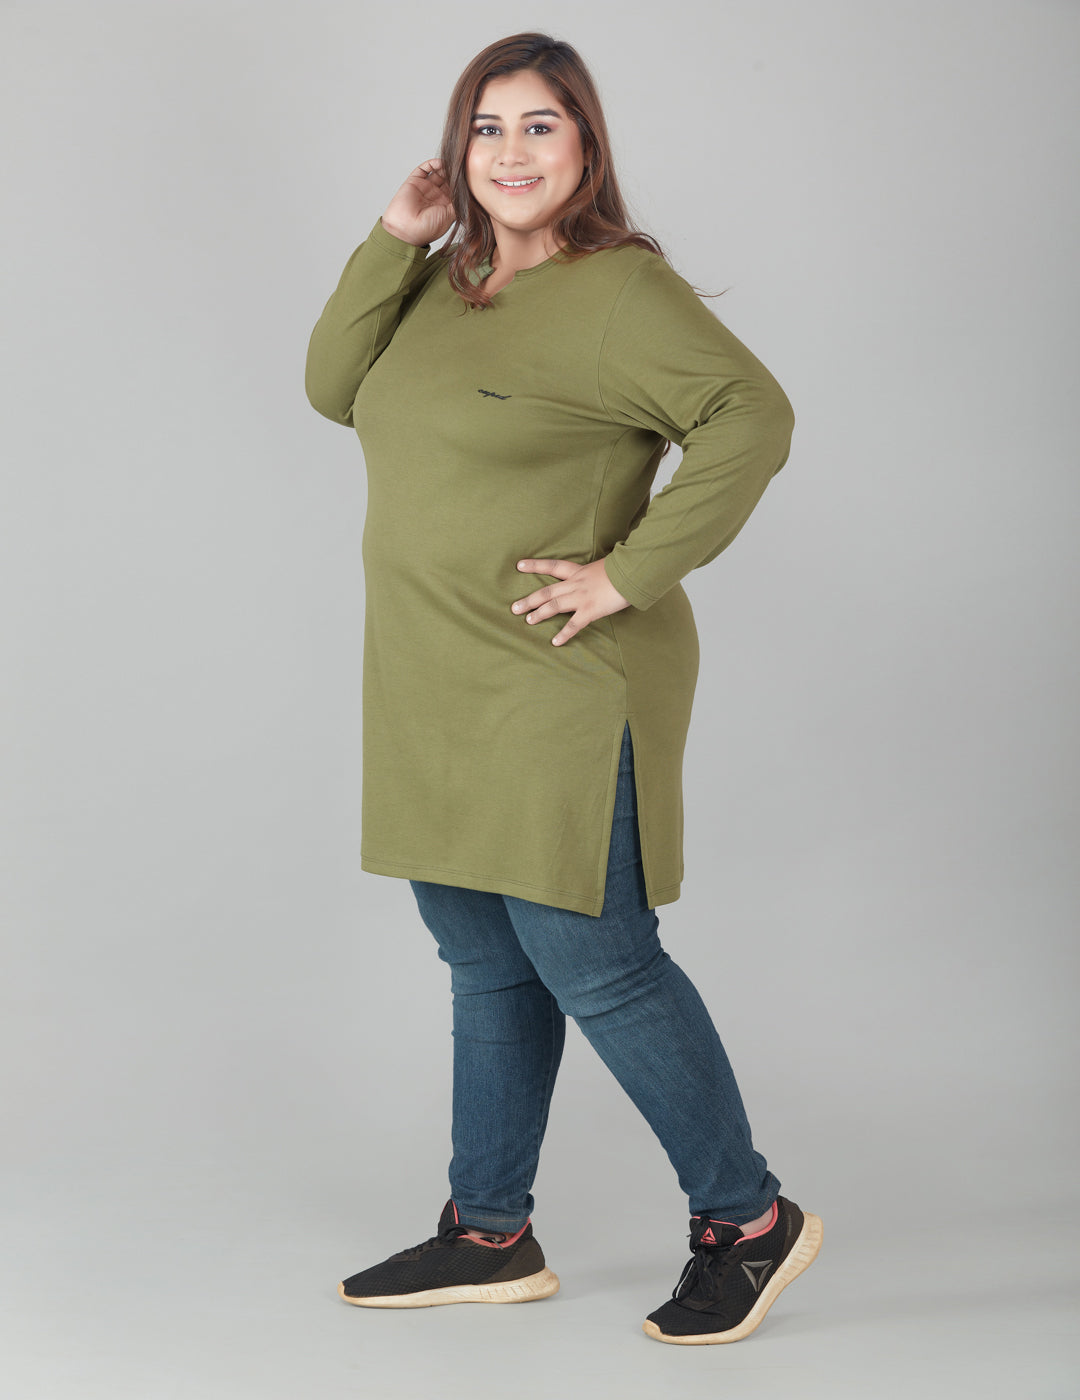 Comfy Olive Green Cotton Plus Size Full Sleeve Long Top For Women Online In India